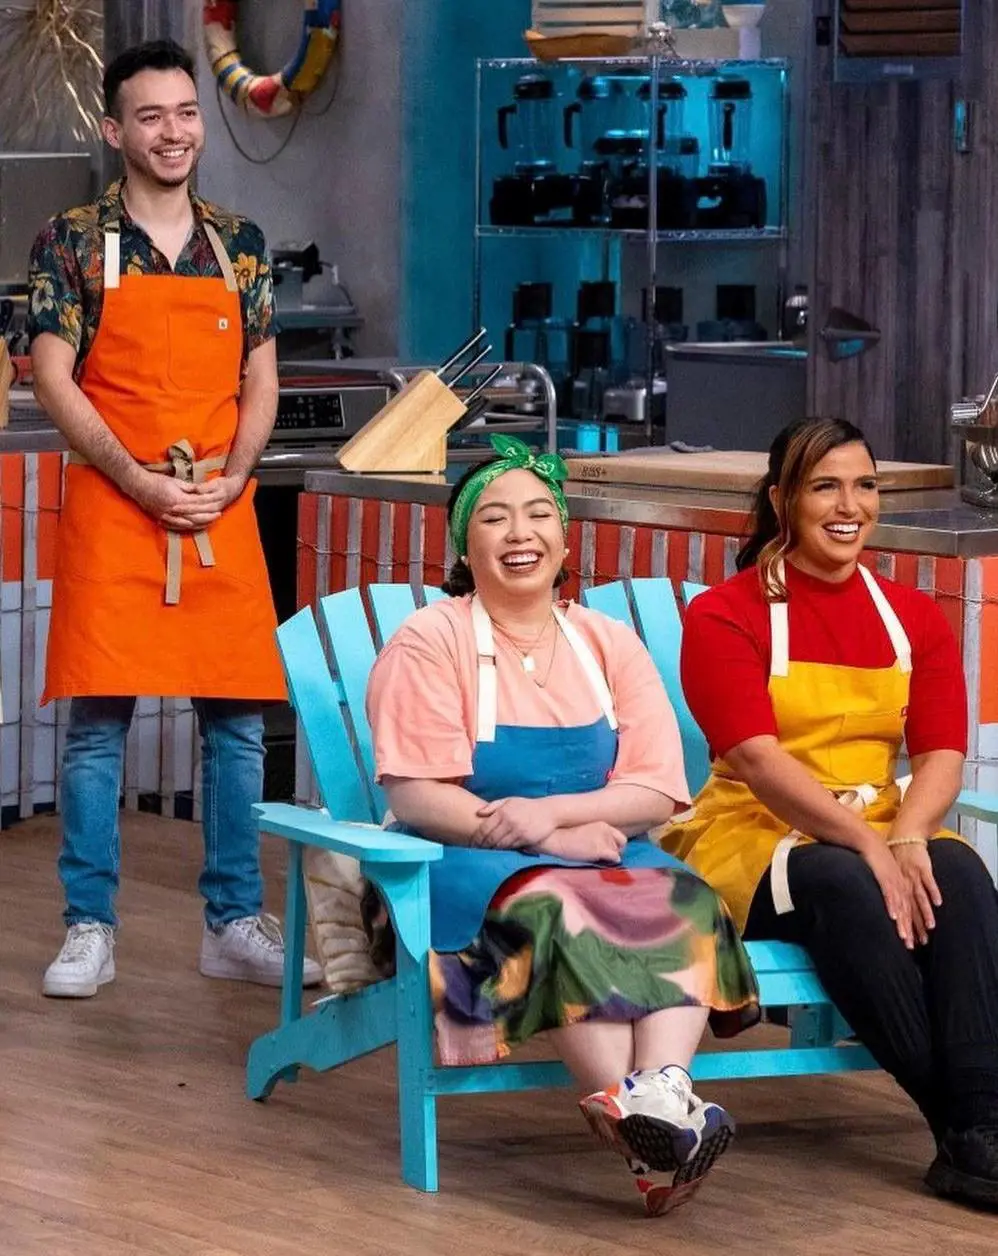 The picture showing (from left) Carlos, Alyssa, and Zoe from Summer Baking Championship Episode 2